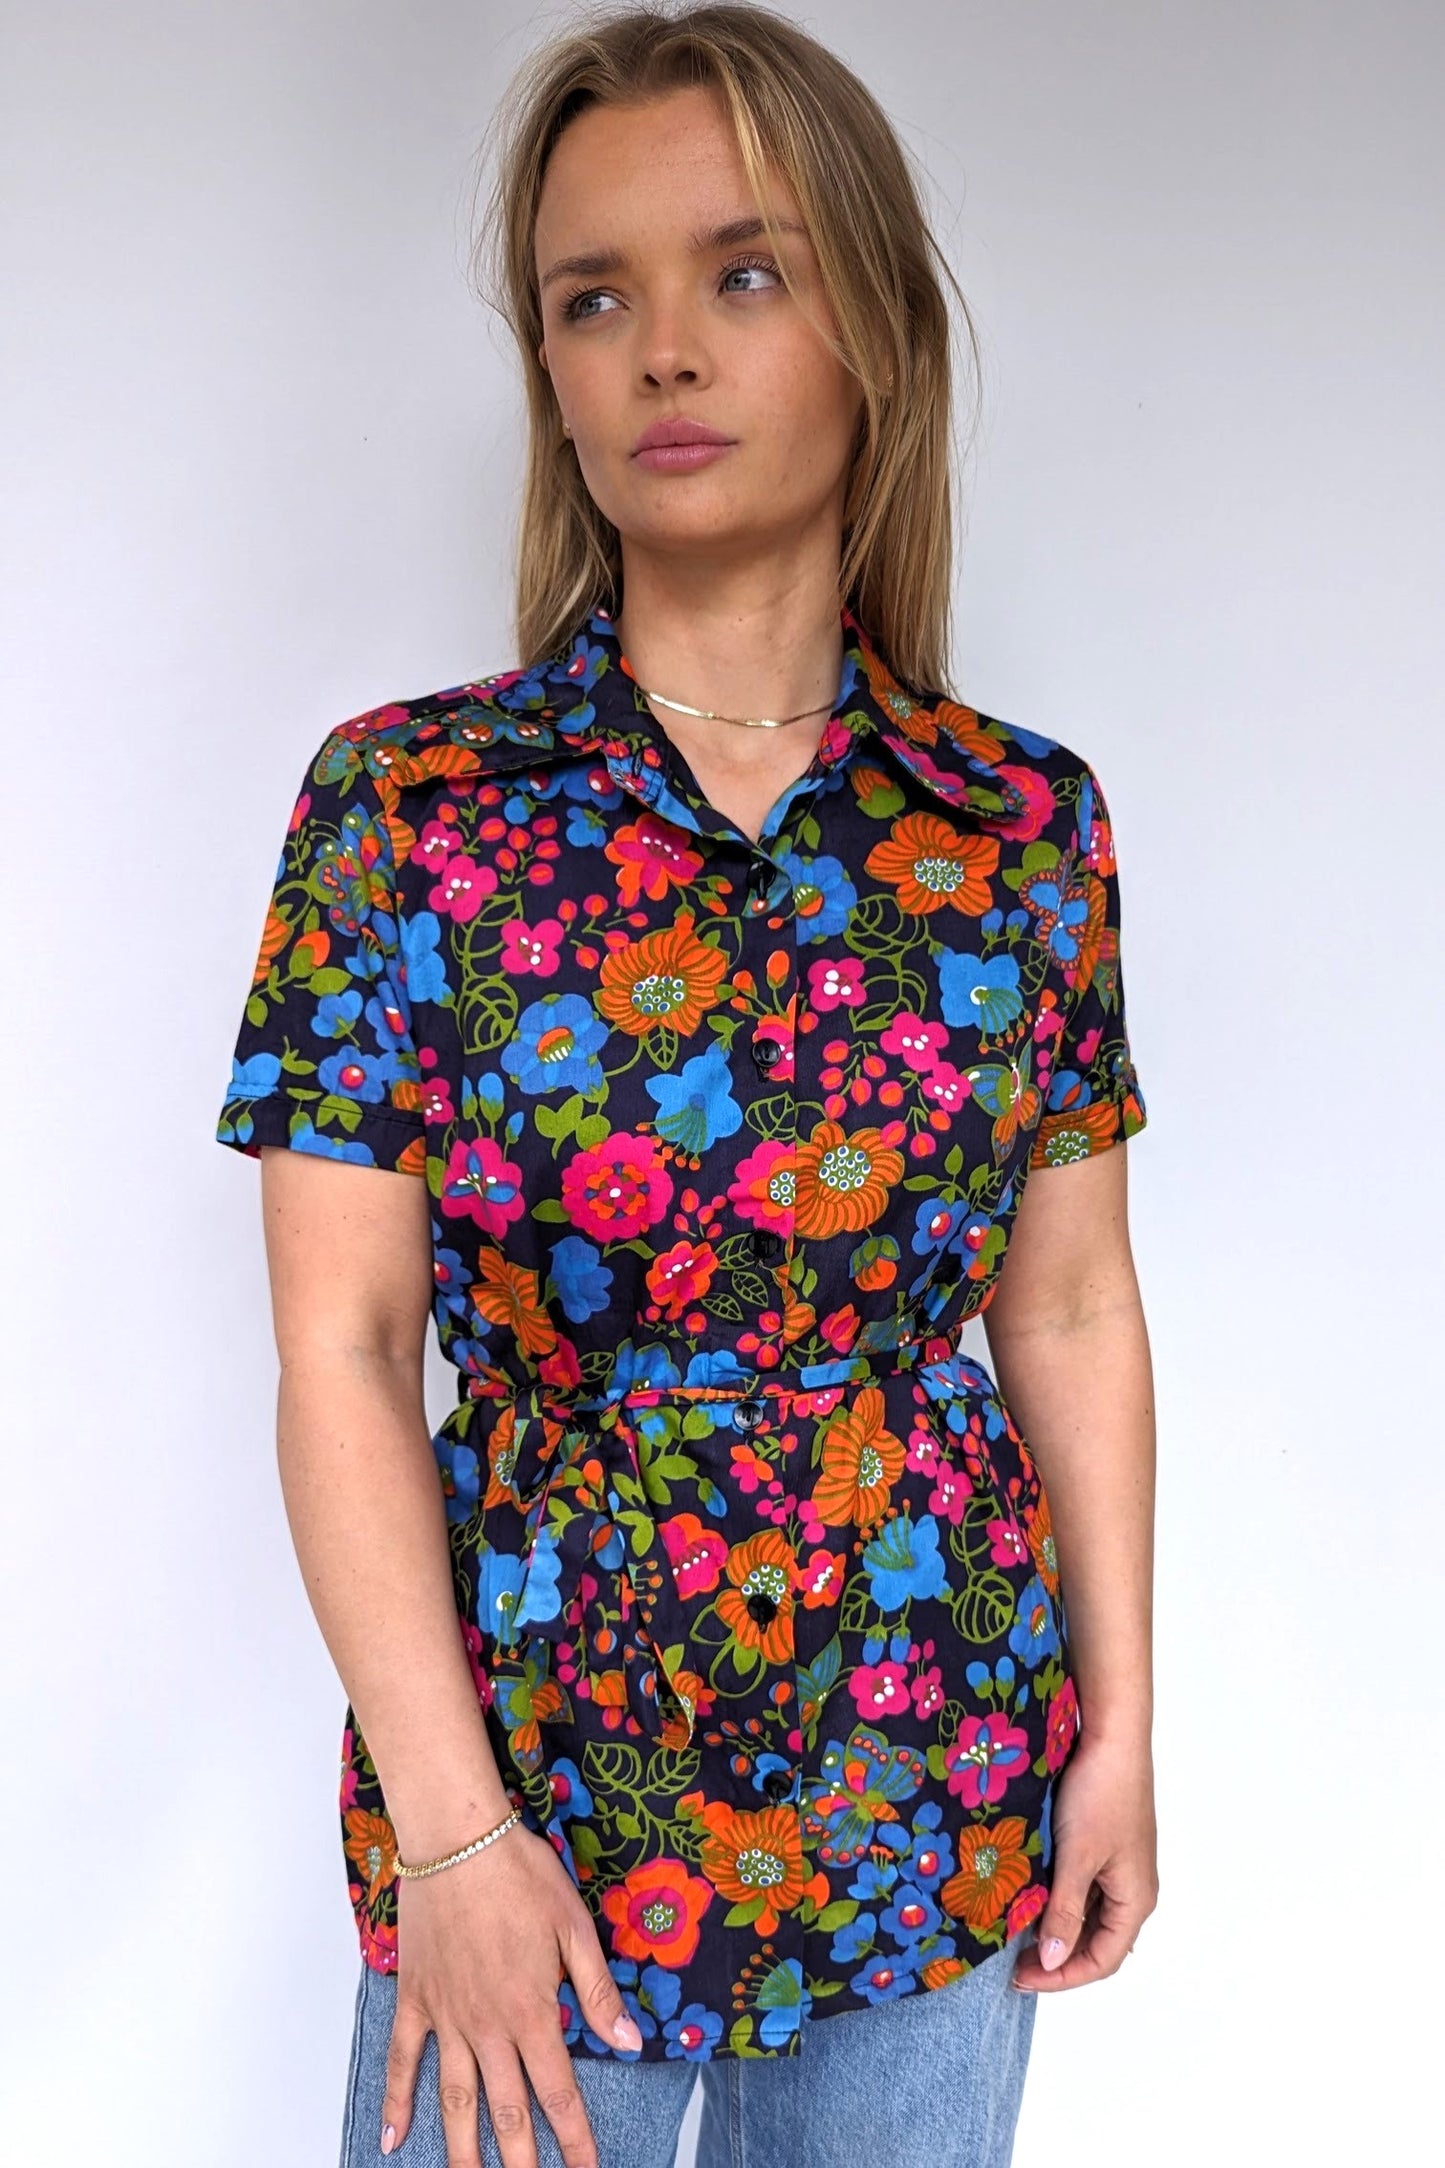 blue, orange and pink bright floral summer vintage blouse with tie waist and dagger collar